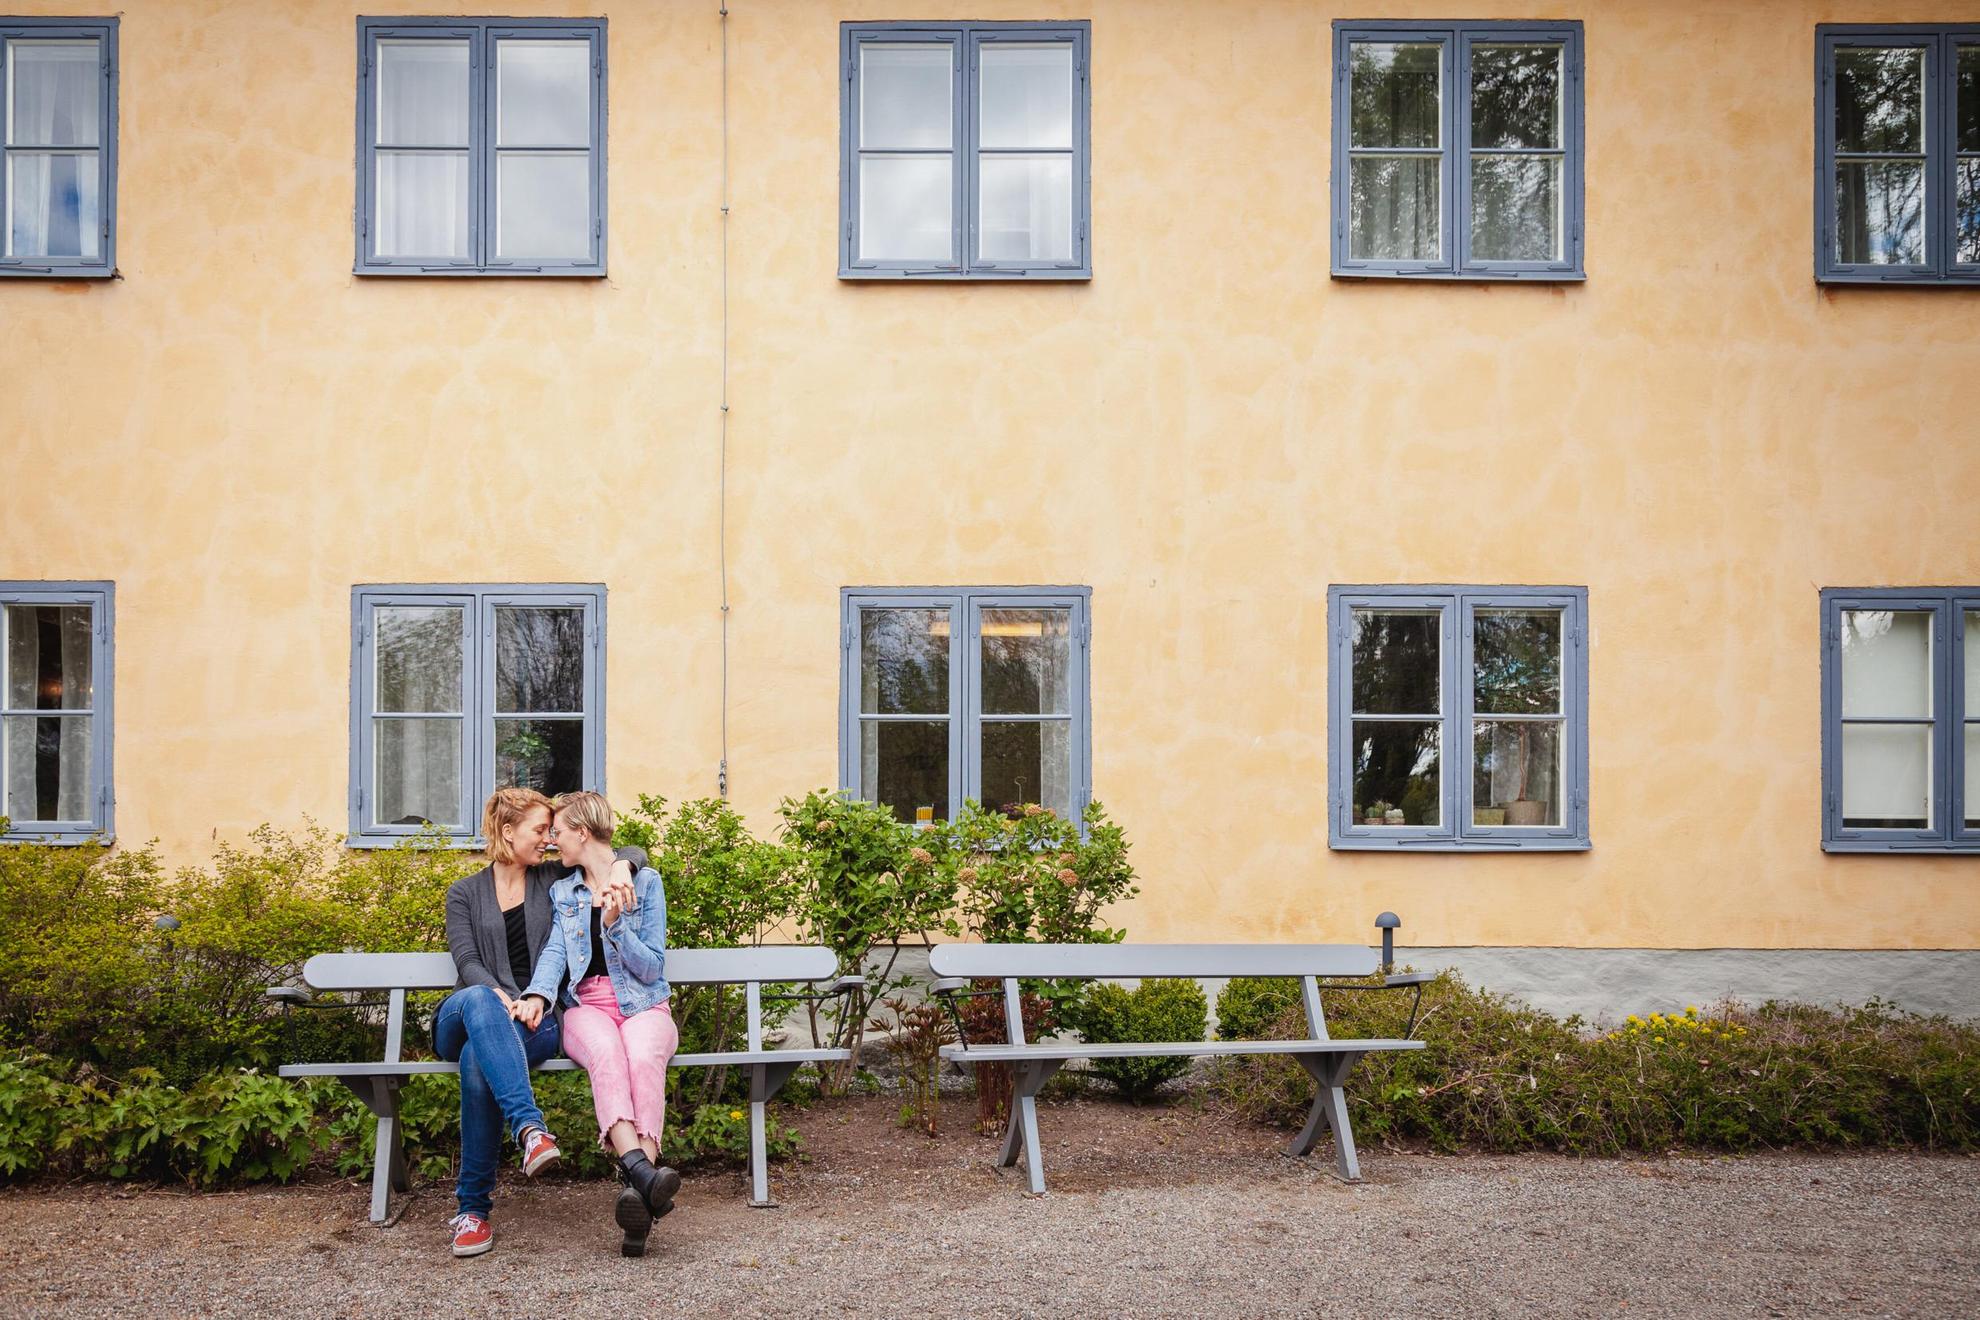 Two women kissing and holding hands while sitting on a park bench outside a house.